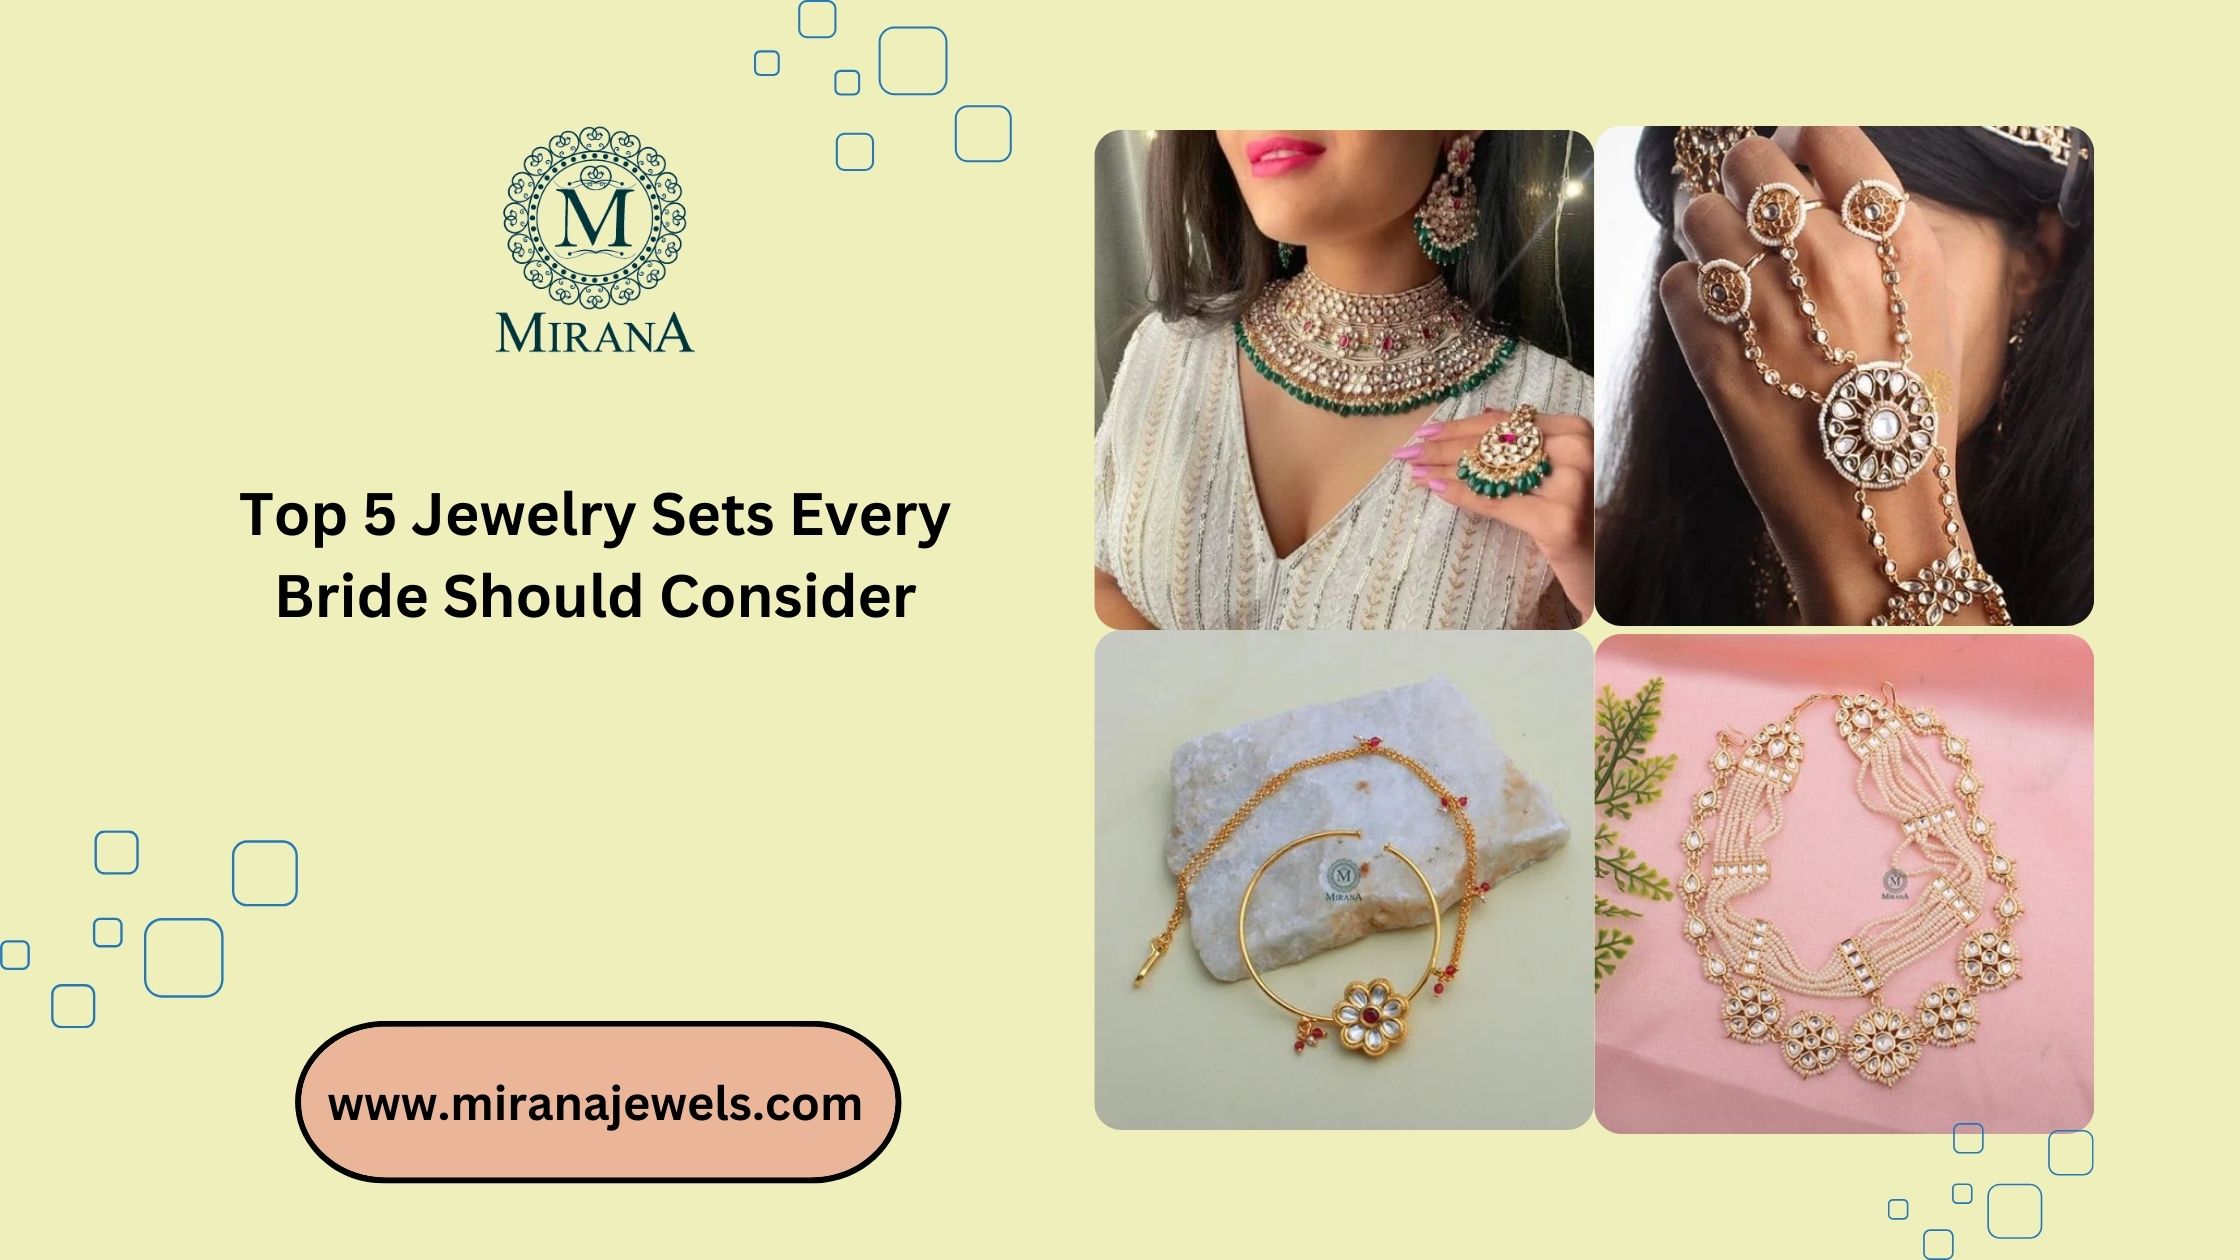 Top 5 Jewelry Sets Every Bride Should Consider